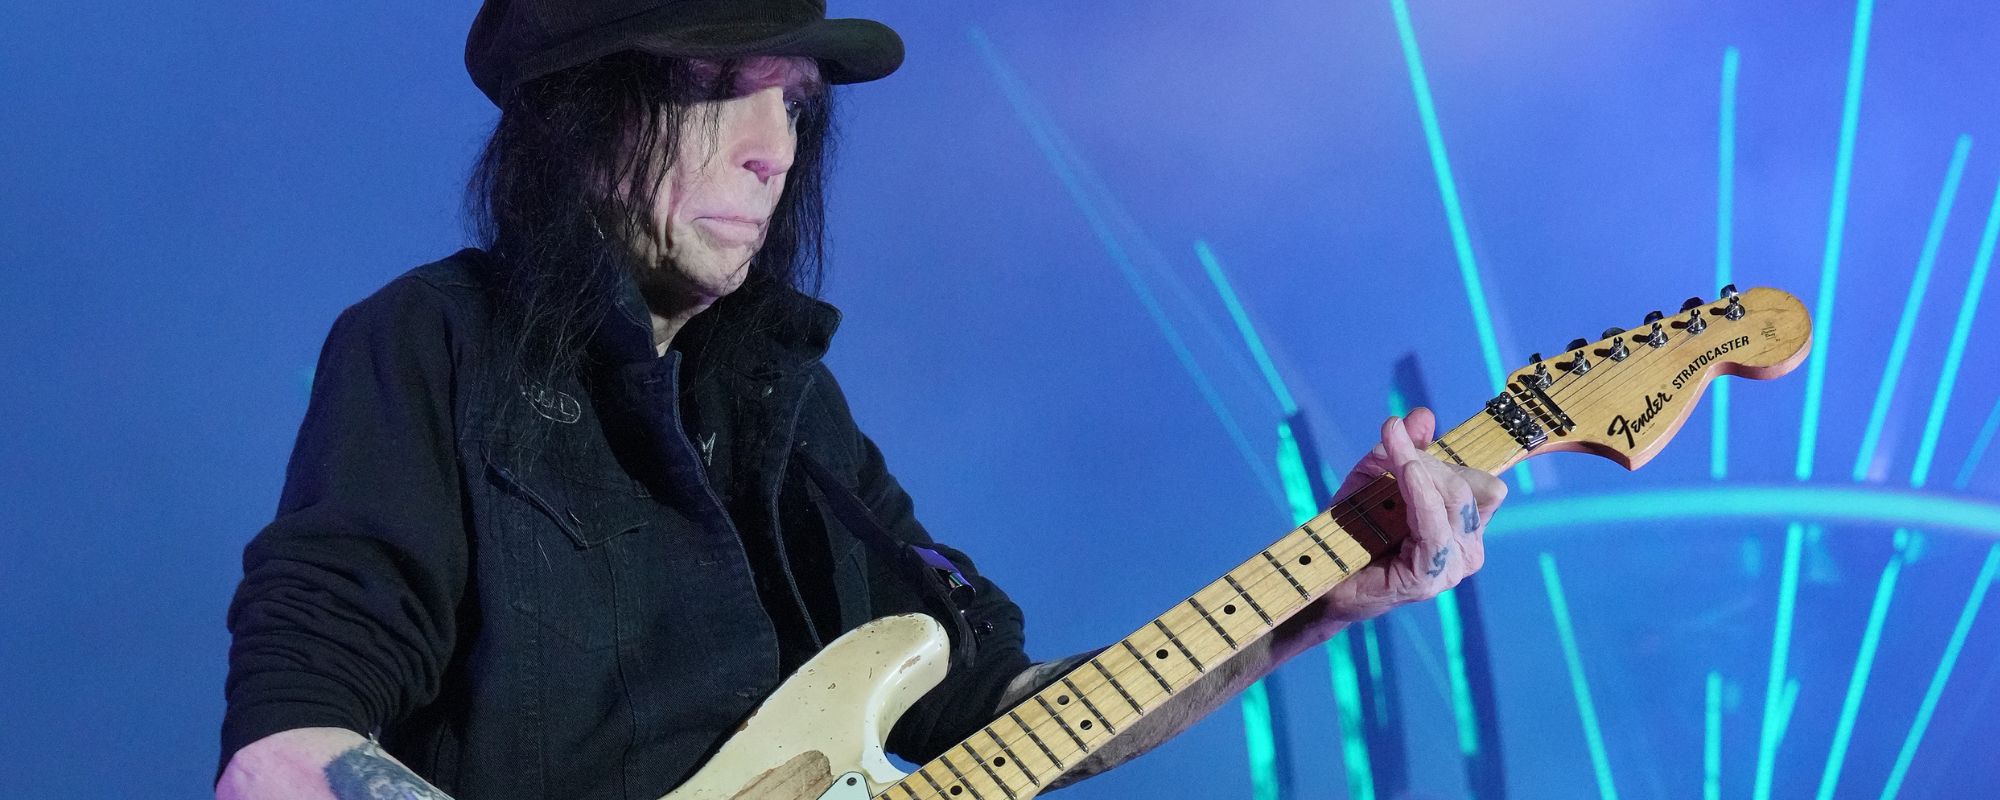 Mick Mars Details Solo Album, Including Song Written About Former Mötley Crüe Bandmates